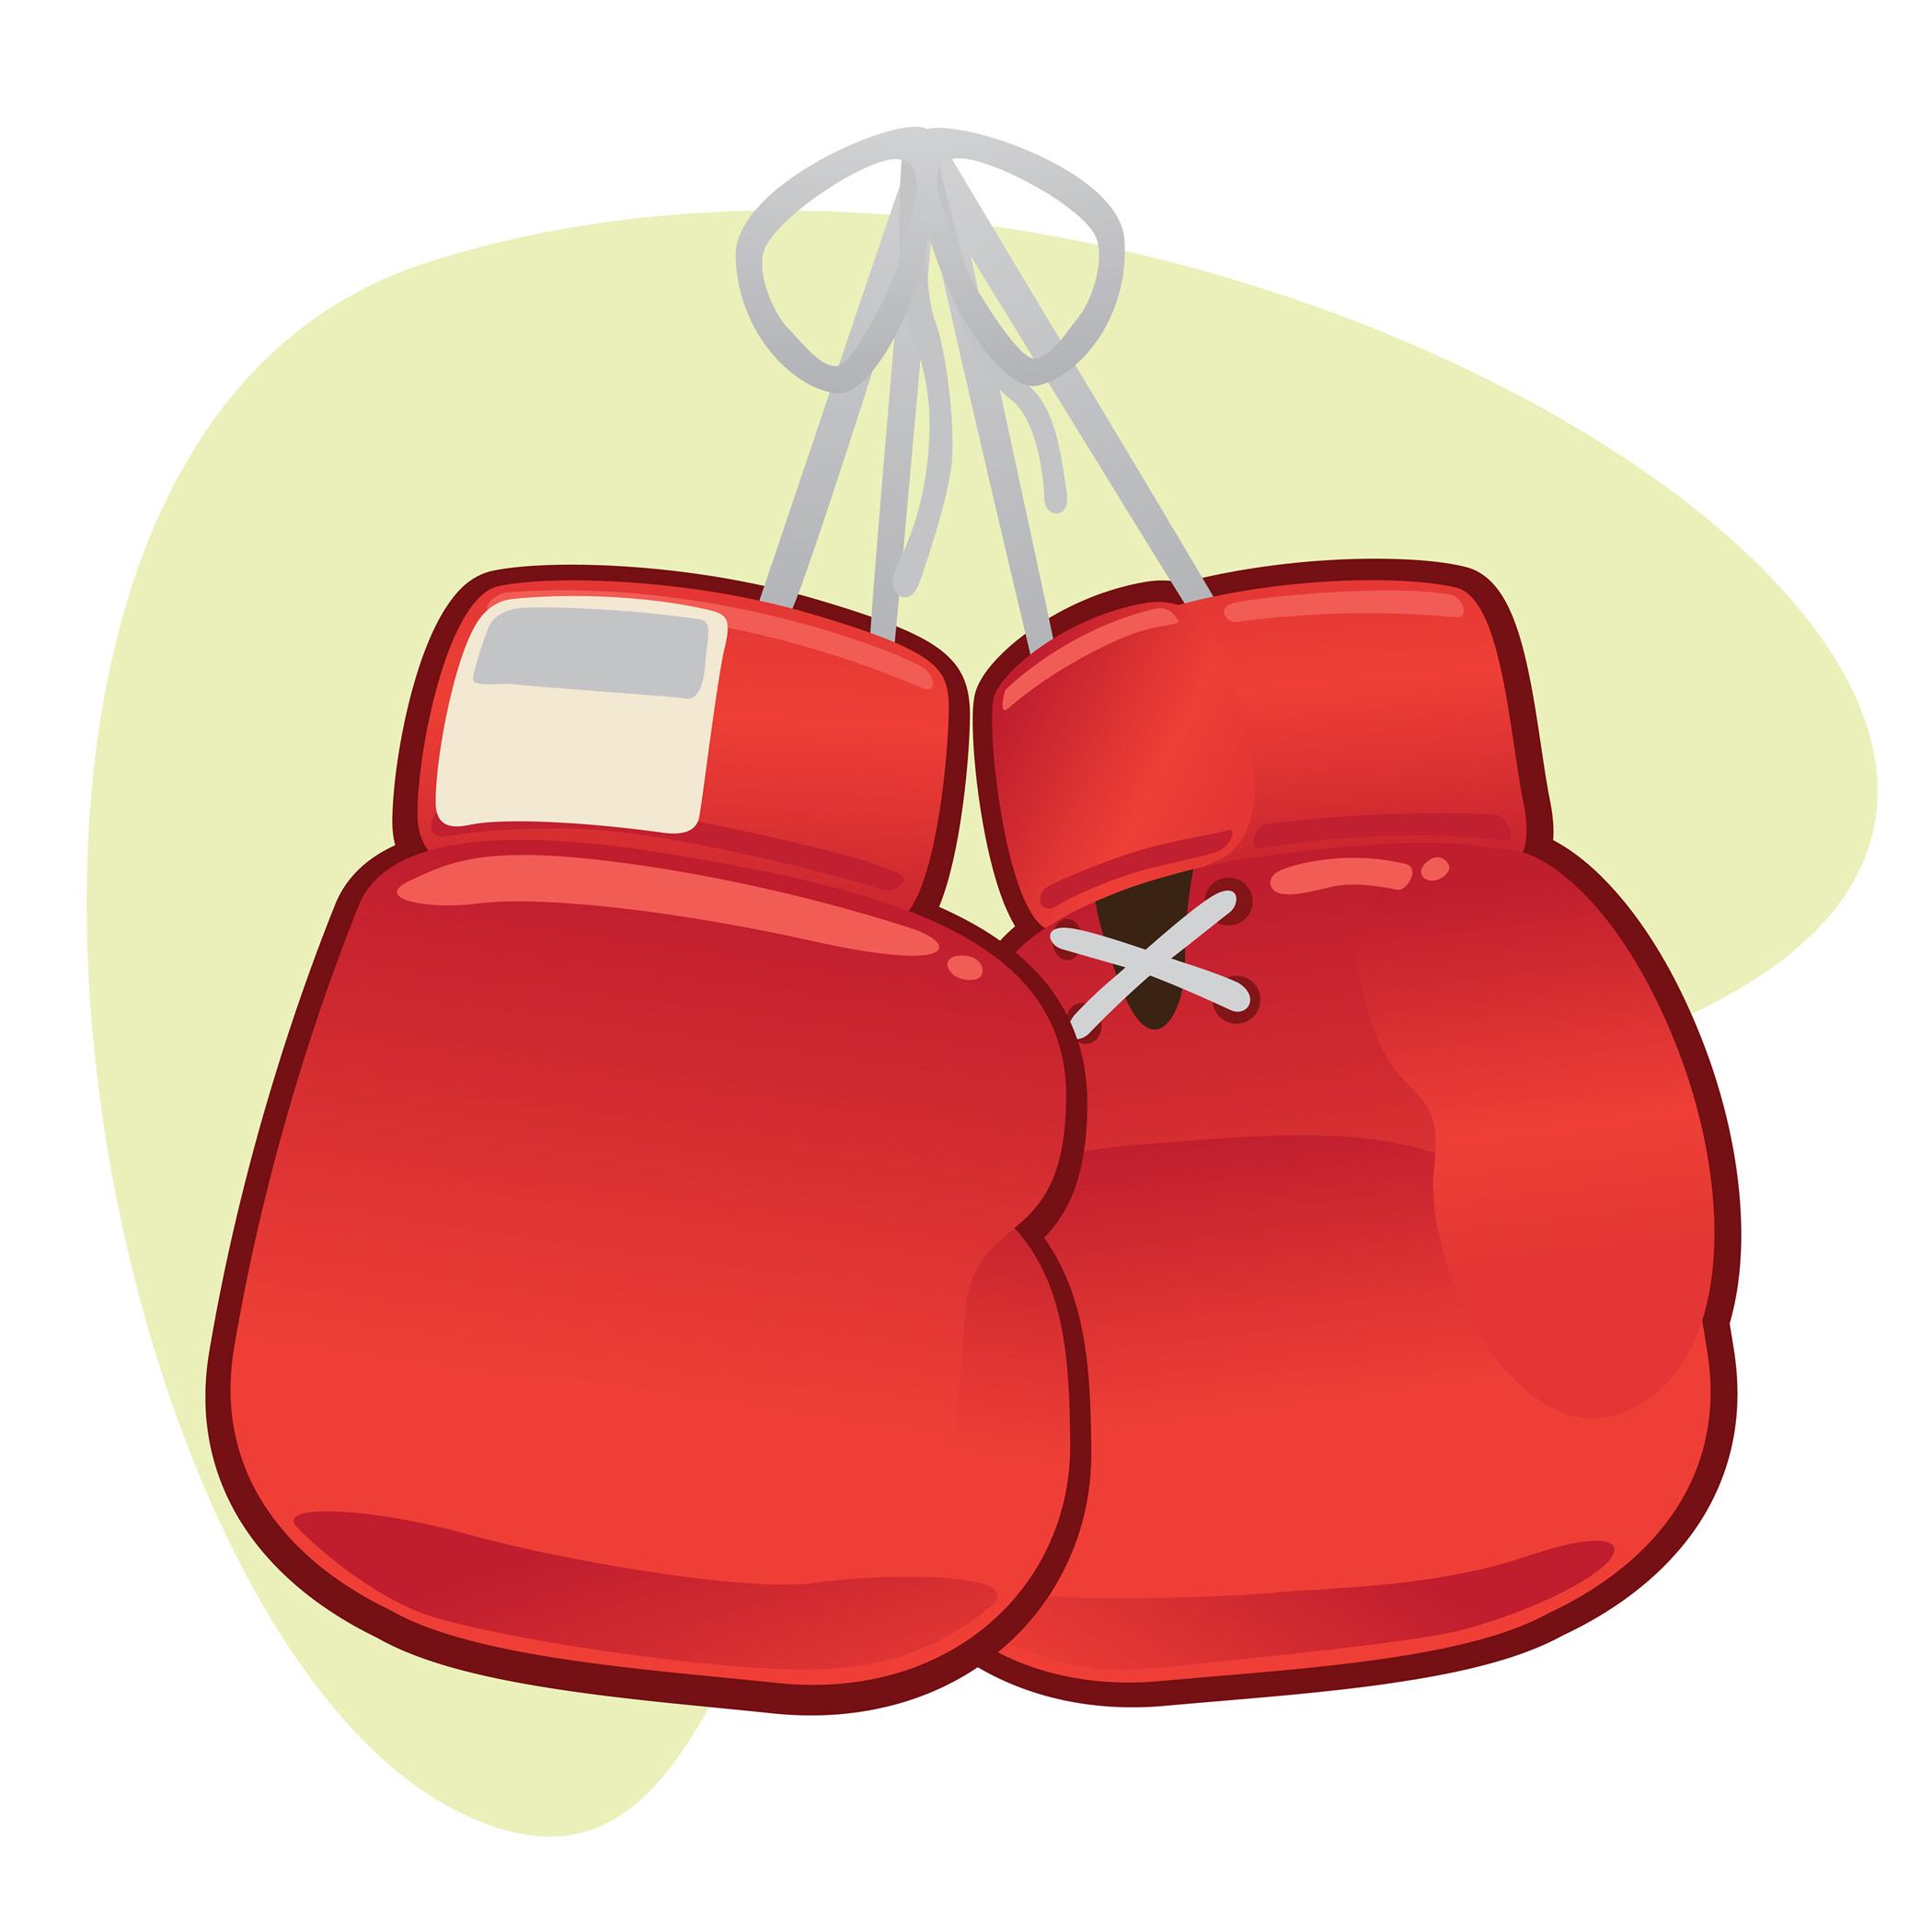 Boxing Glove Images - Clipart library